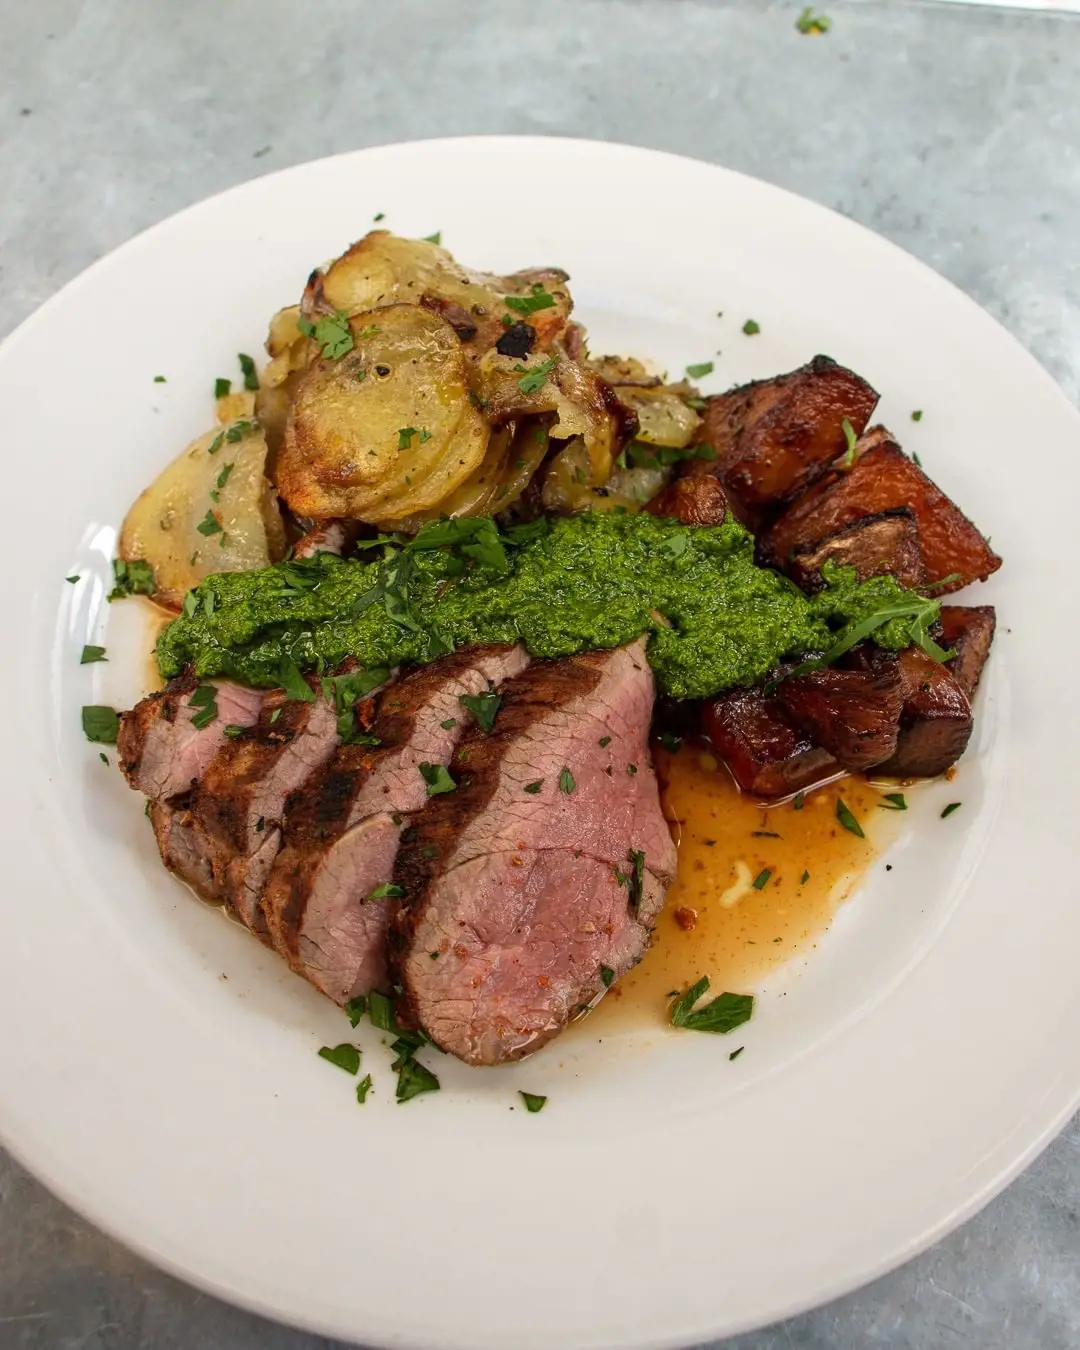 Charcoal grilled lamb, turnips steamed with sherry vinegar, thyme and crispy potatoes